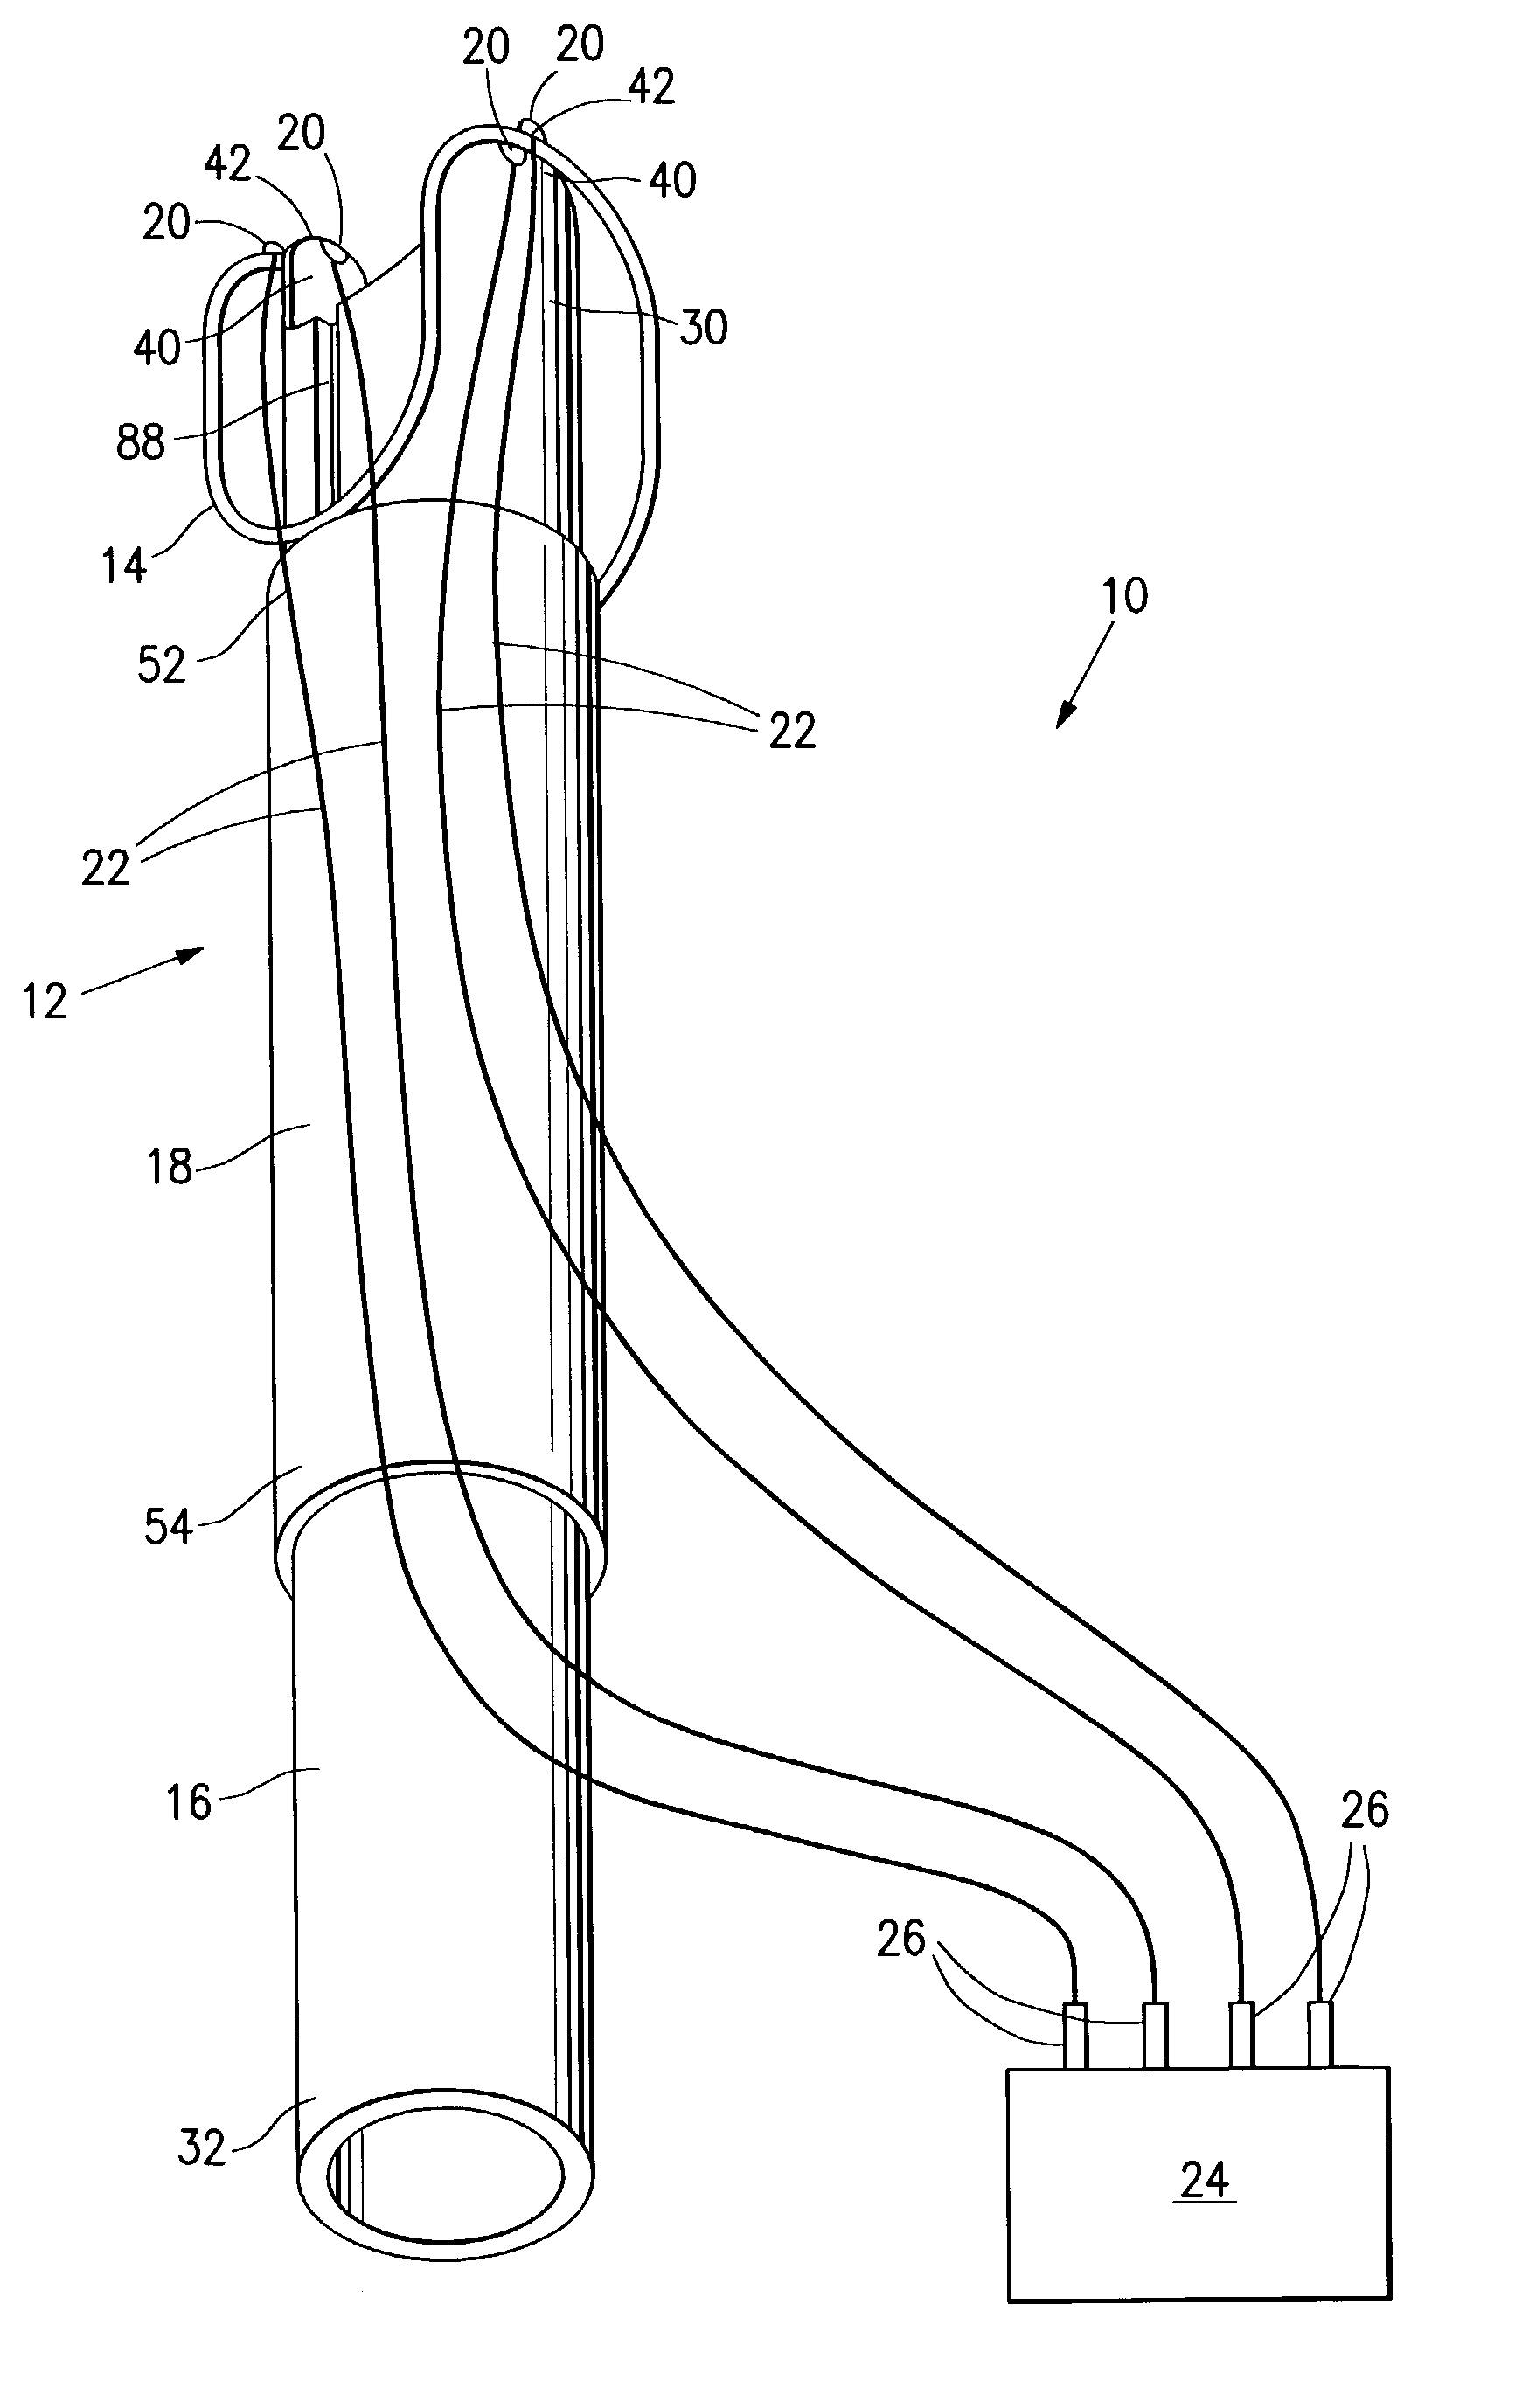 Deployable constrictor for uterine artery occlusion